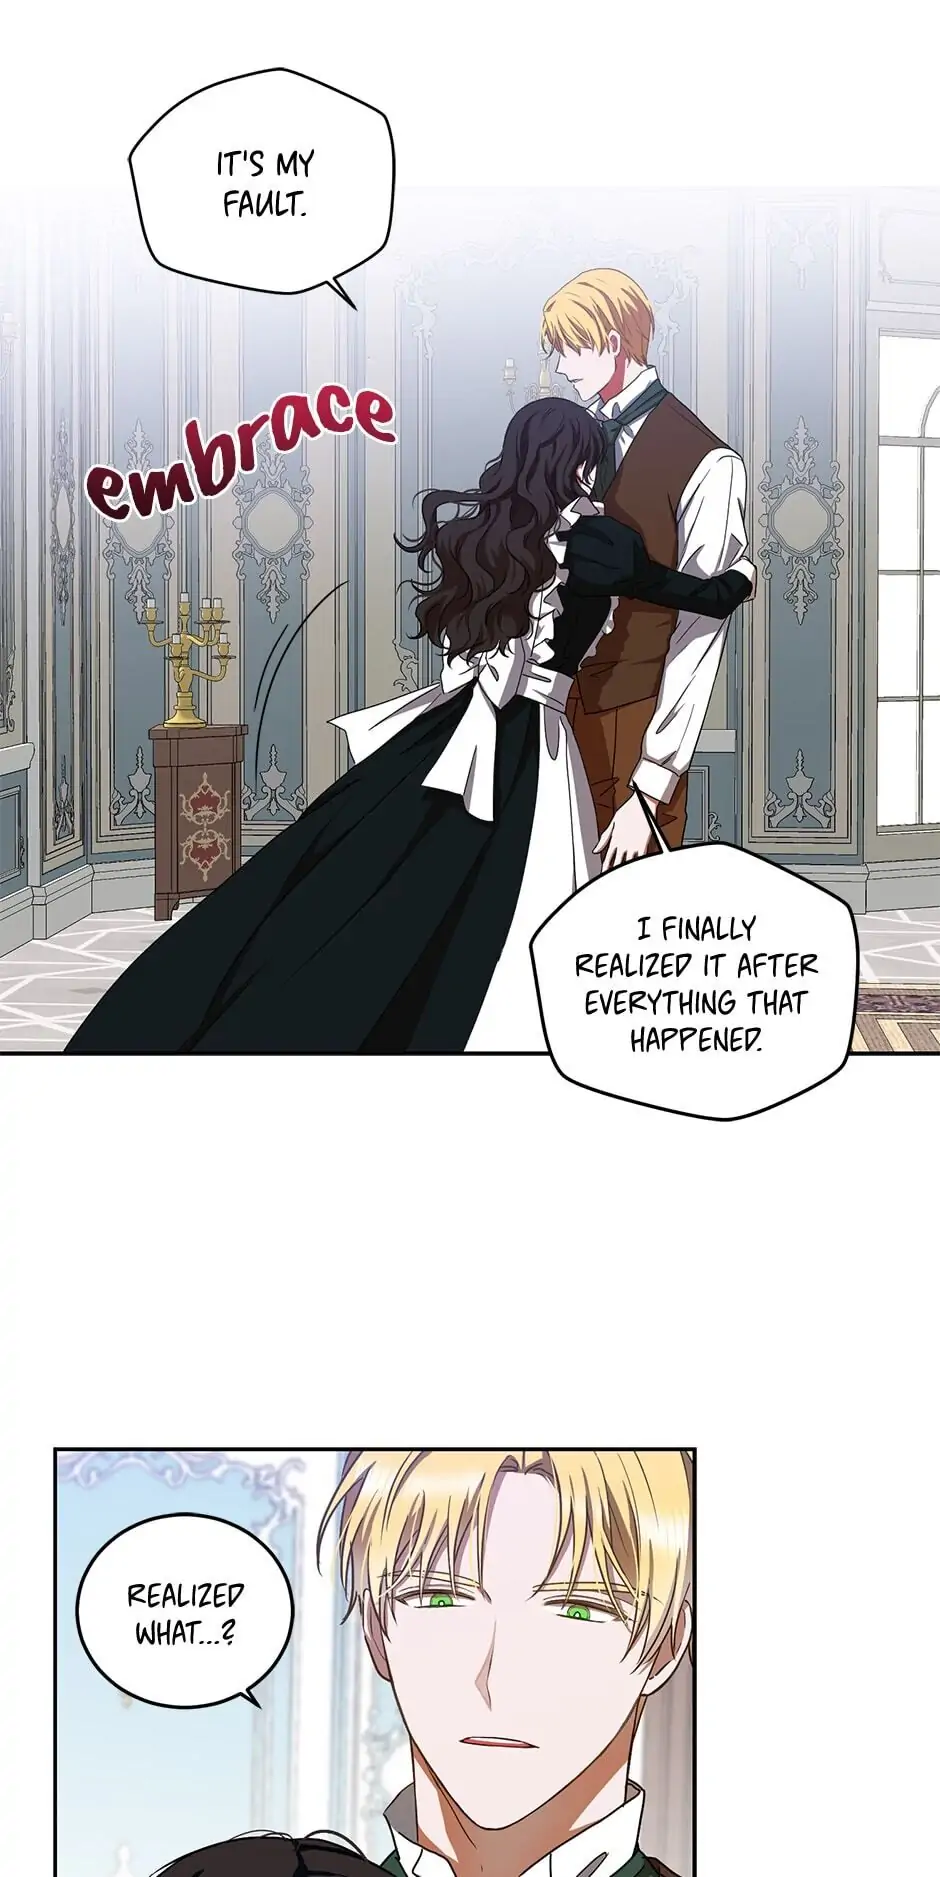 Reverse Harem or Not a Reverse Harem? Part 3 of 3: Princess Maid (webcomic)  37 chapters - ongoing